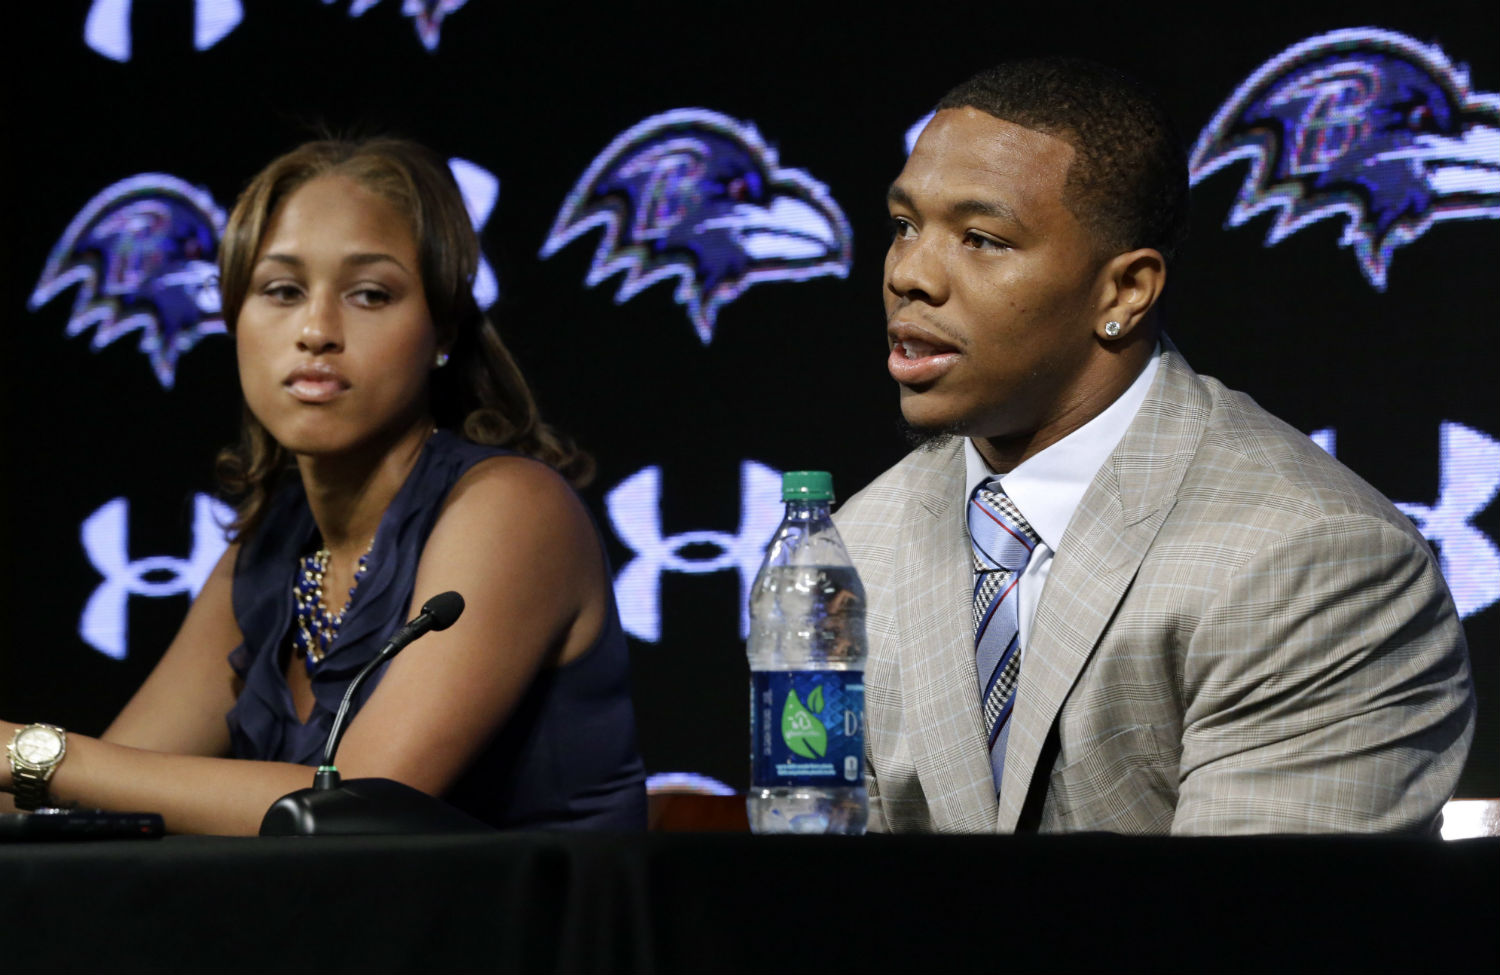 Beyond Janay Rice: Lessons From a State Where Domestic Violence Runs Rampant